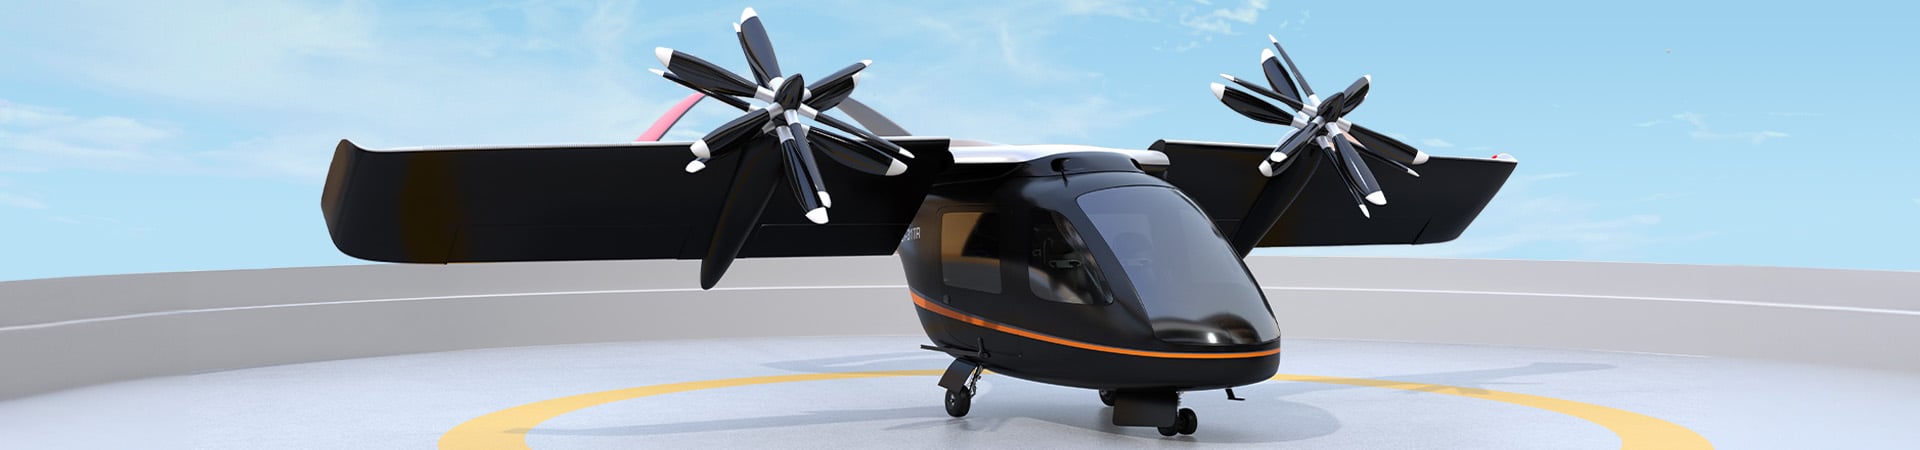 New developers of advanced, next generation aviation equipment like eVTOL aircraft can join Altair's ASAP to gain access to a wide range of design, engineering, simulation, analytics, AI, and HPC software.